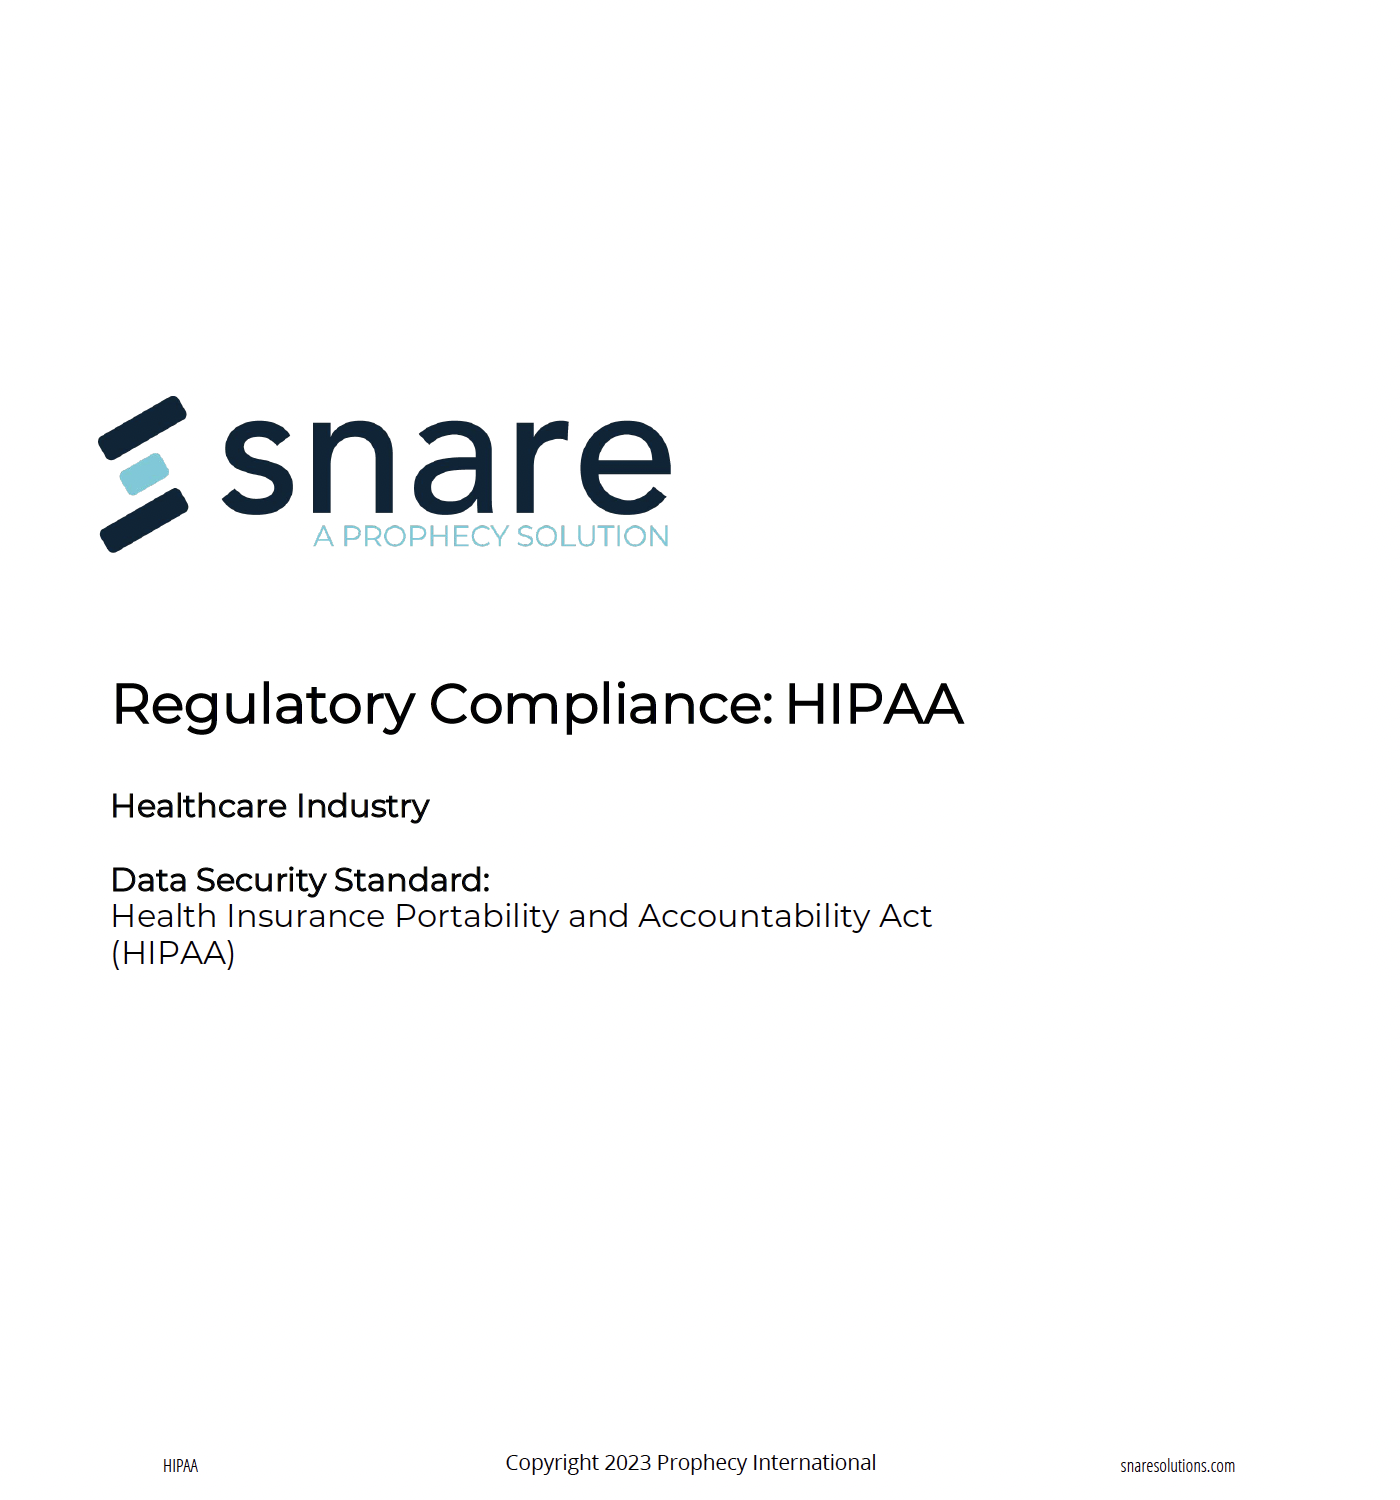 How Snare Centralized Log Management Helps Meet HIPAA Compliance